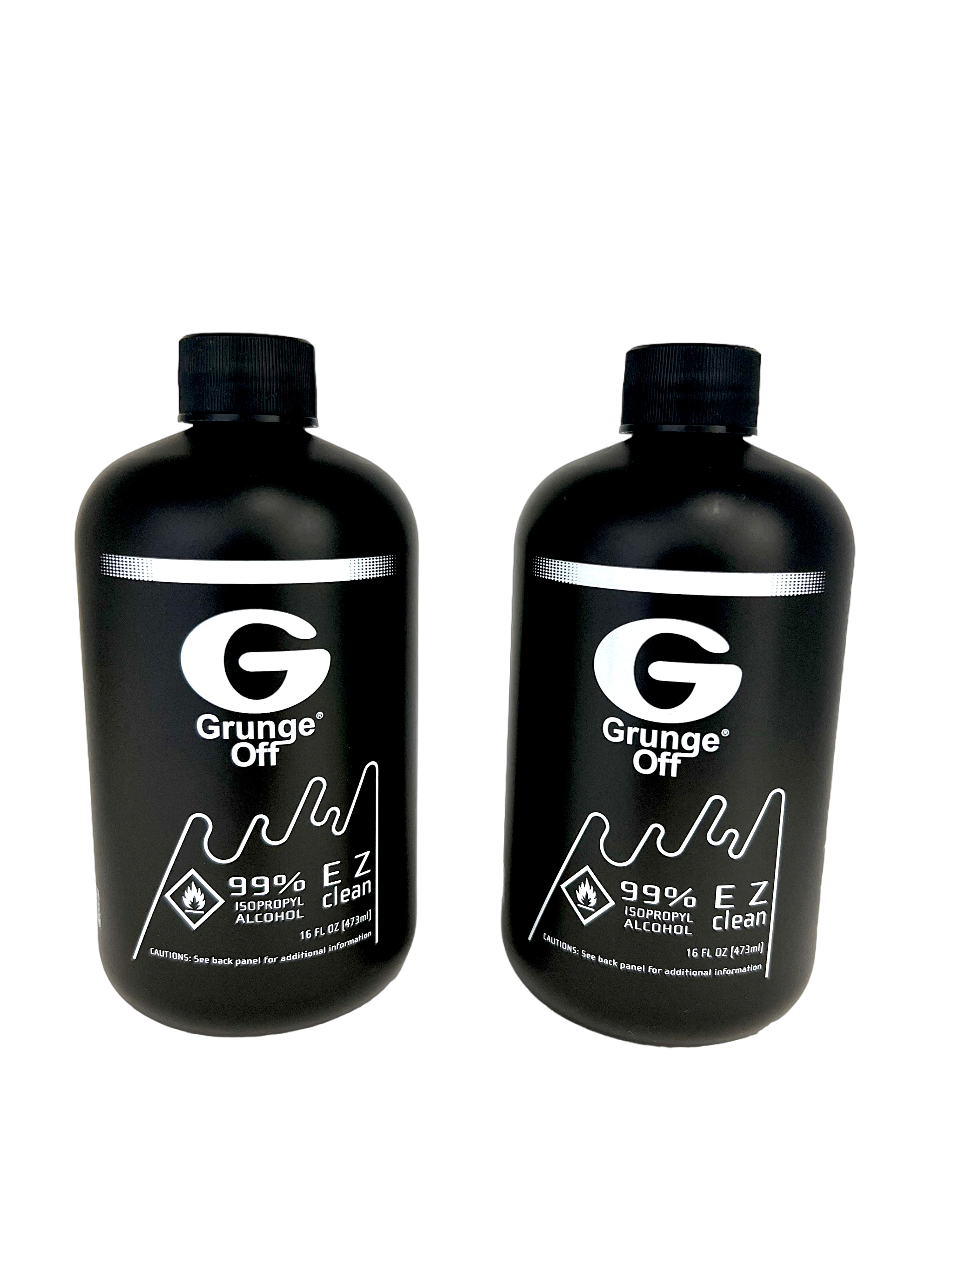 Grunge Off Isopropyl Alcohol - 16 oz bottle of powerful cleaner for pipes and bongs. 